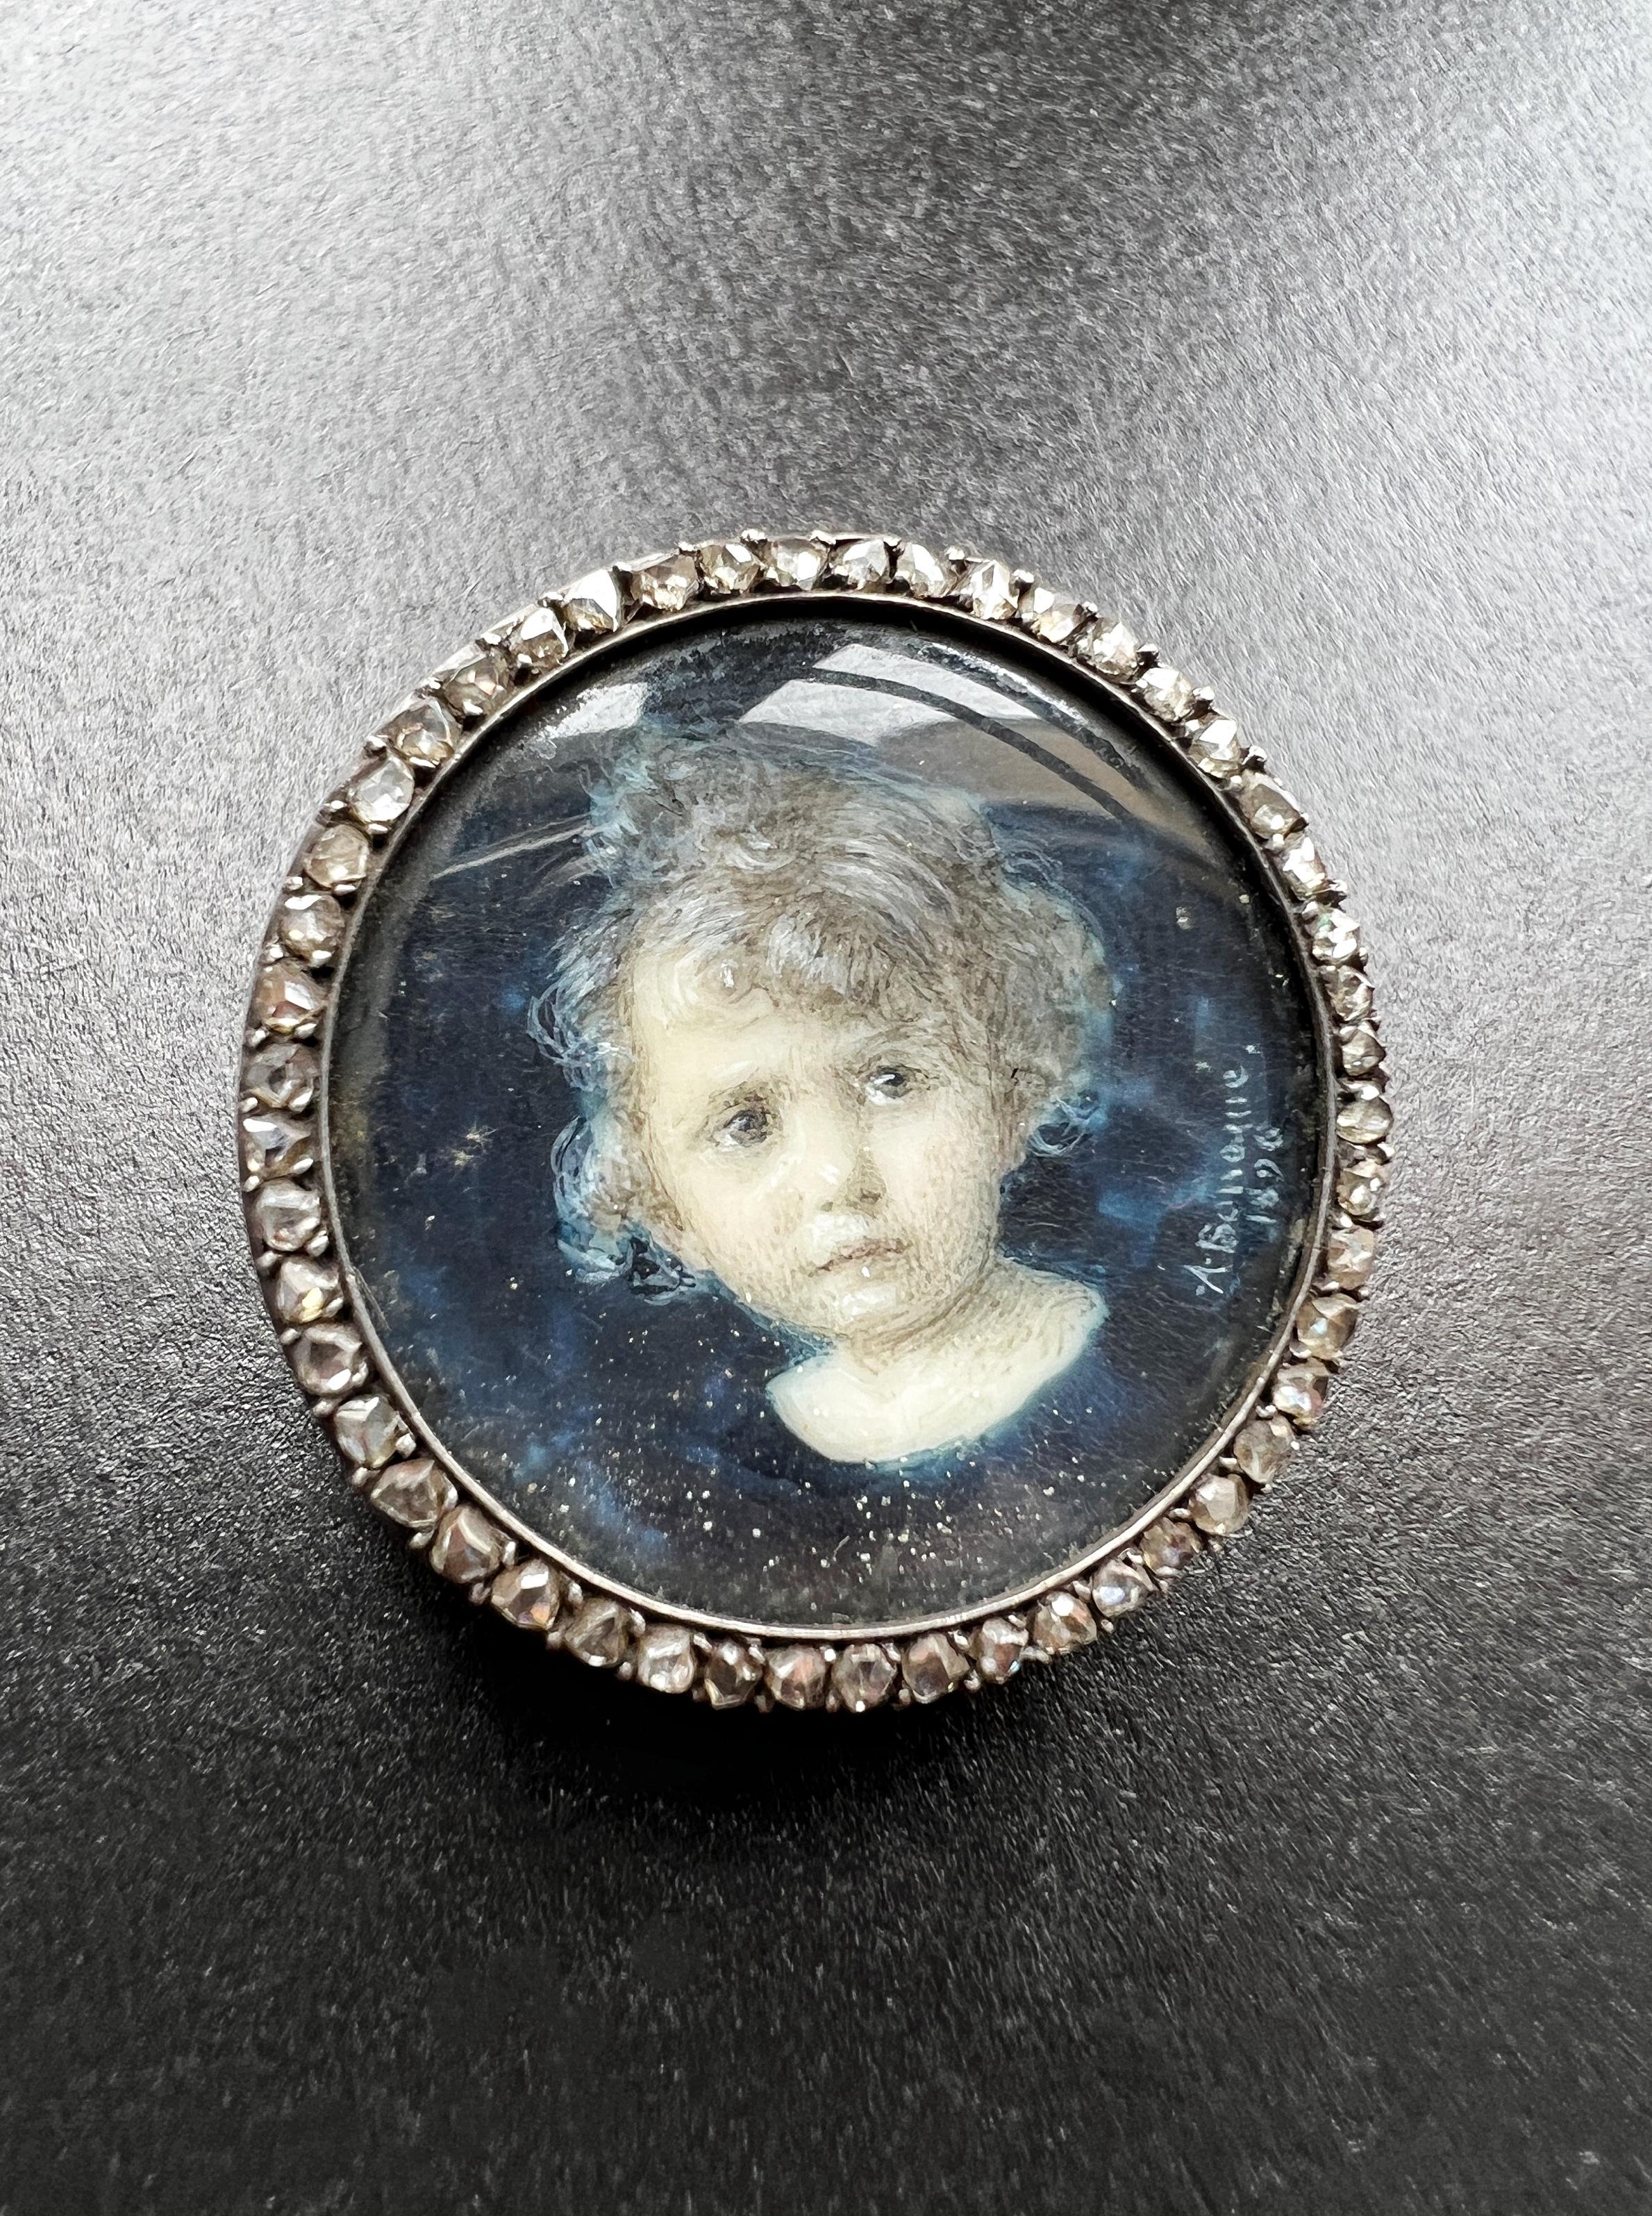 This Victorian era miniature portrait brooch is a stunning example of the artistry and craftsmanship of the time. The brooch features a young child, captured in an intricately detailed miniature portrait, set against a deep blue background. The